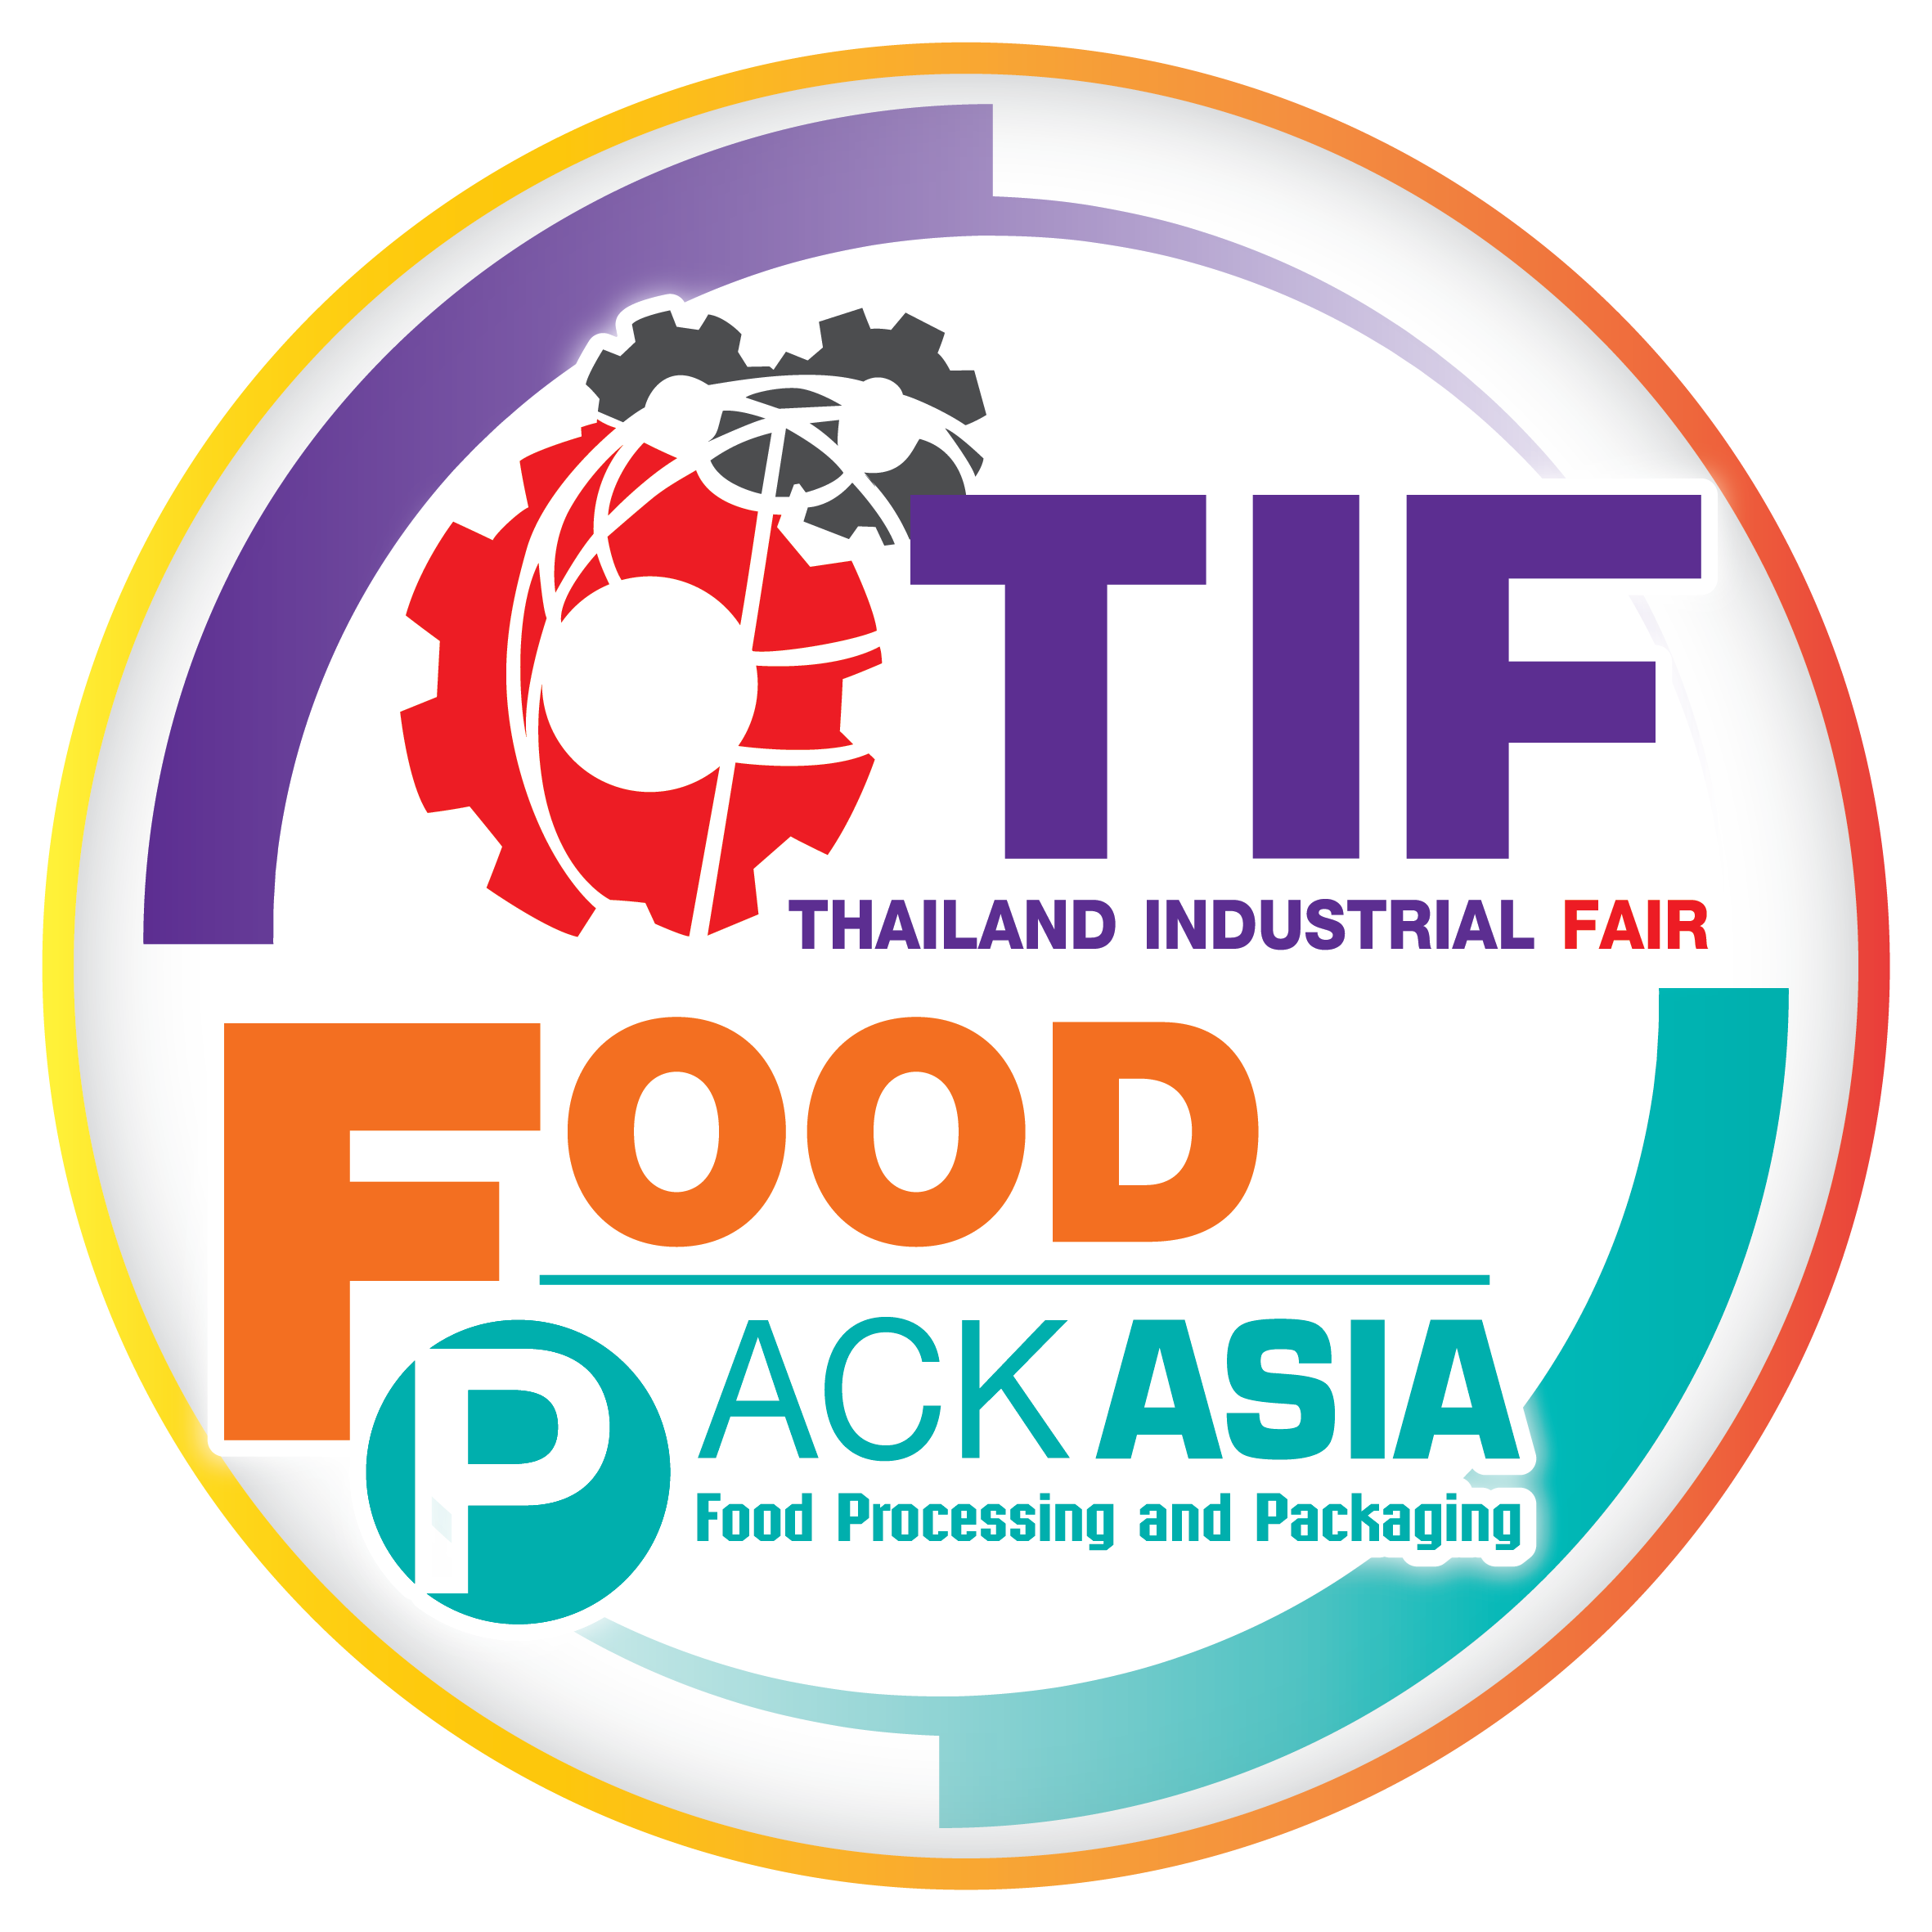 Contact - Thailand Industrial Fair for more information please contact us